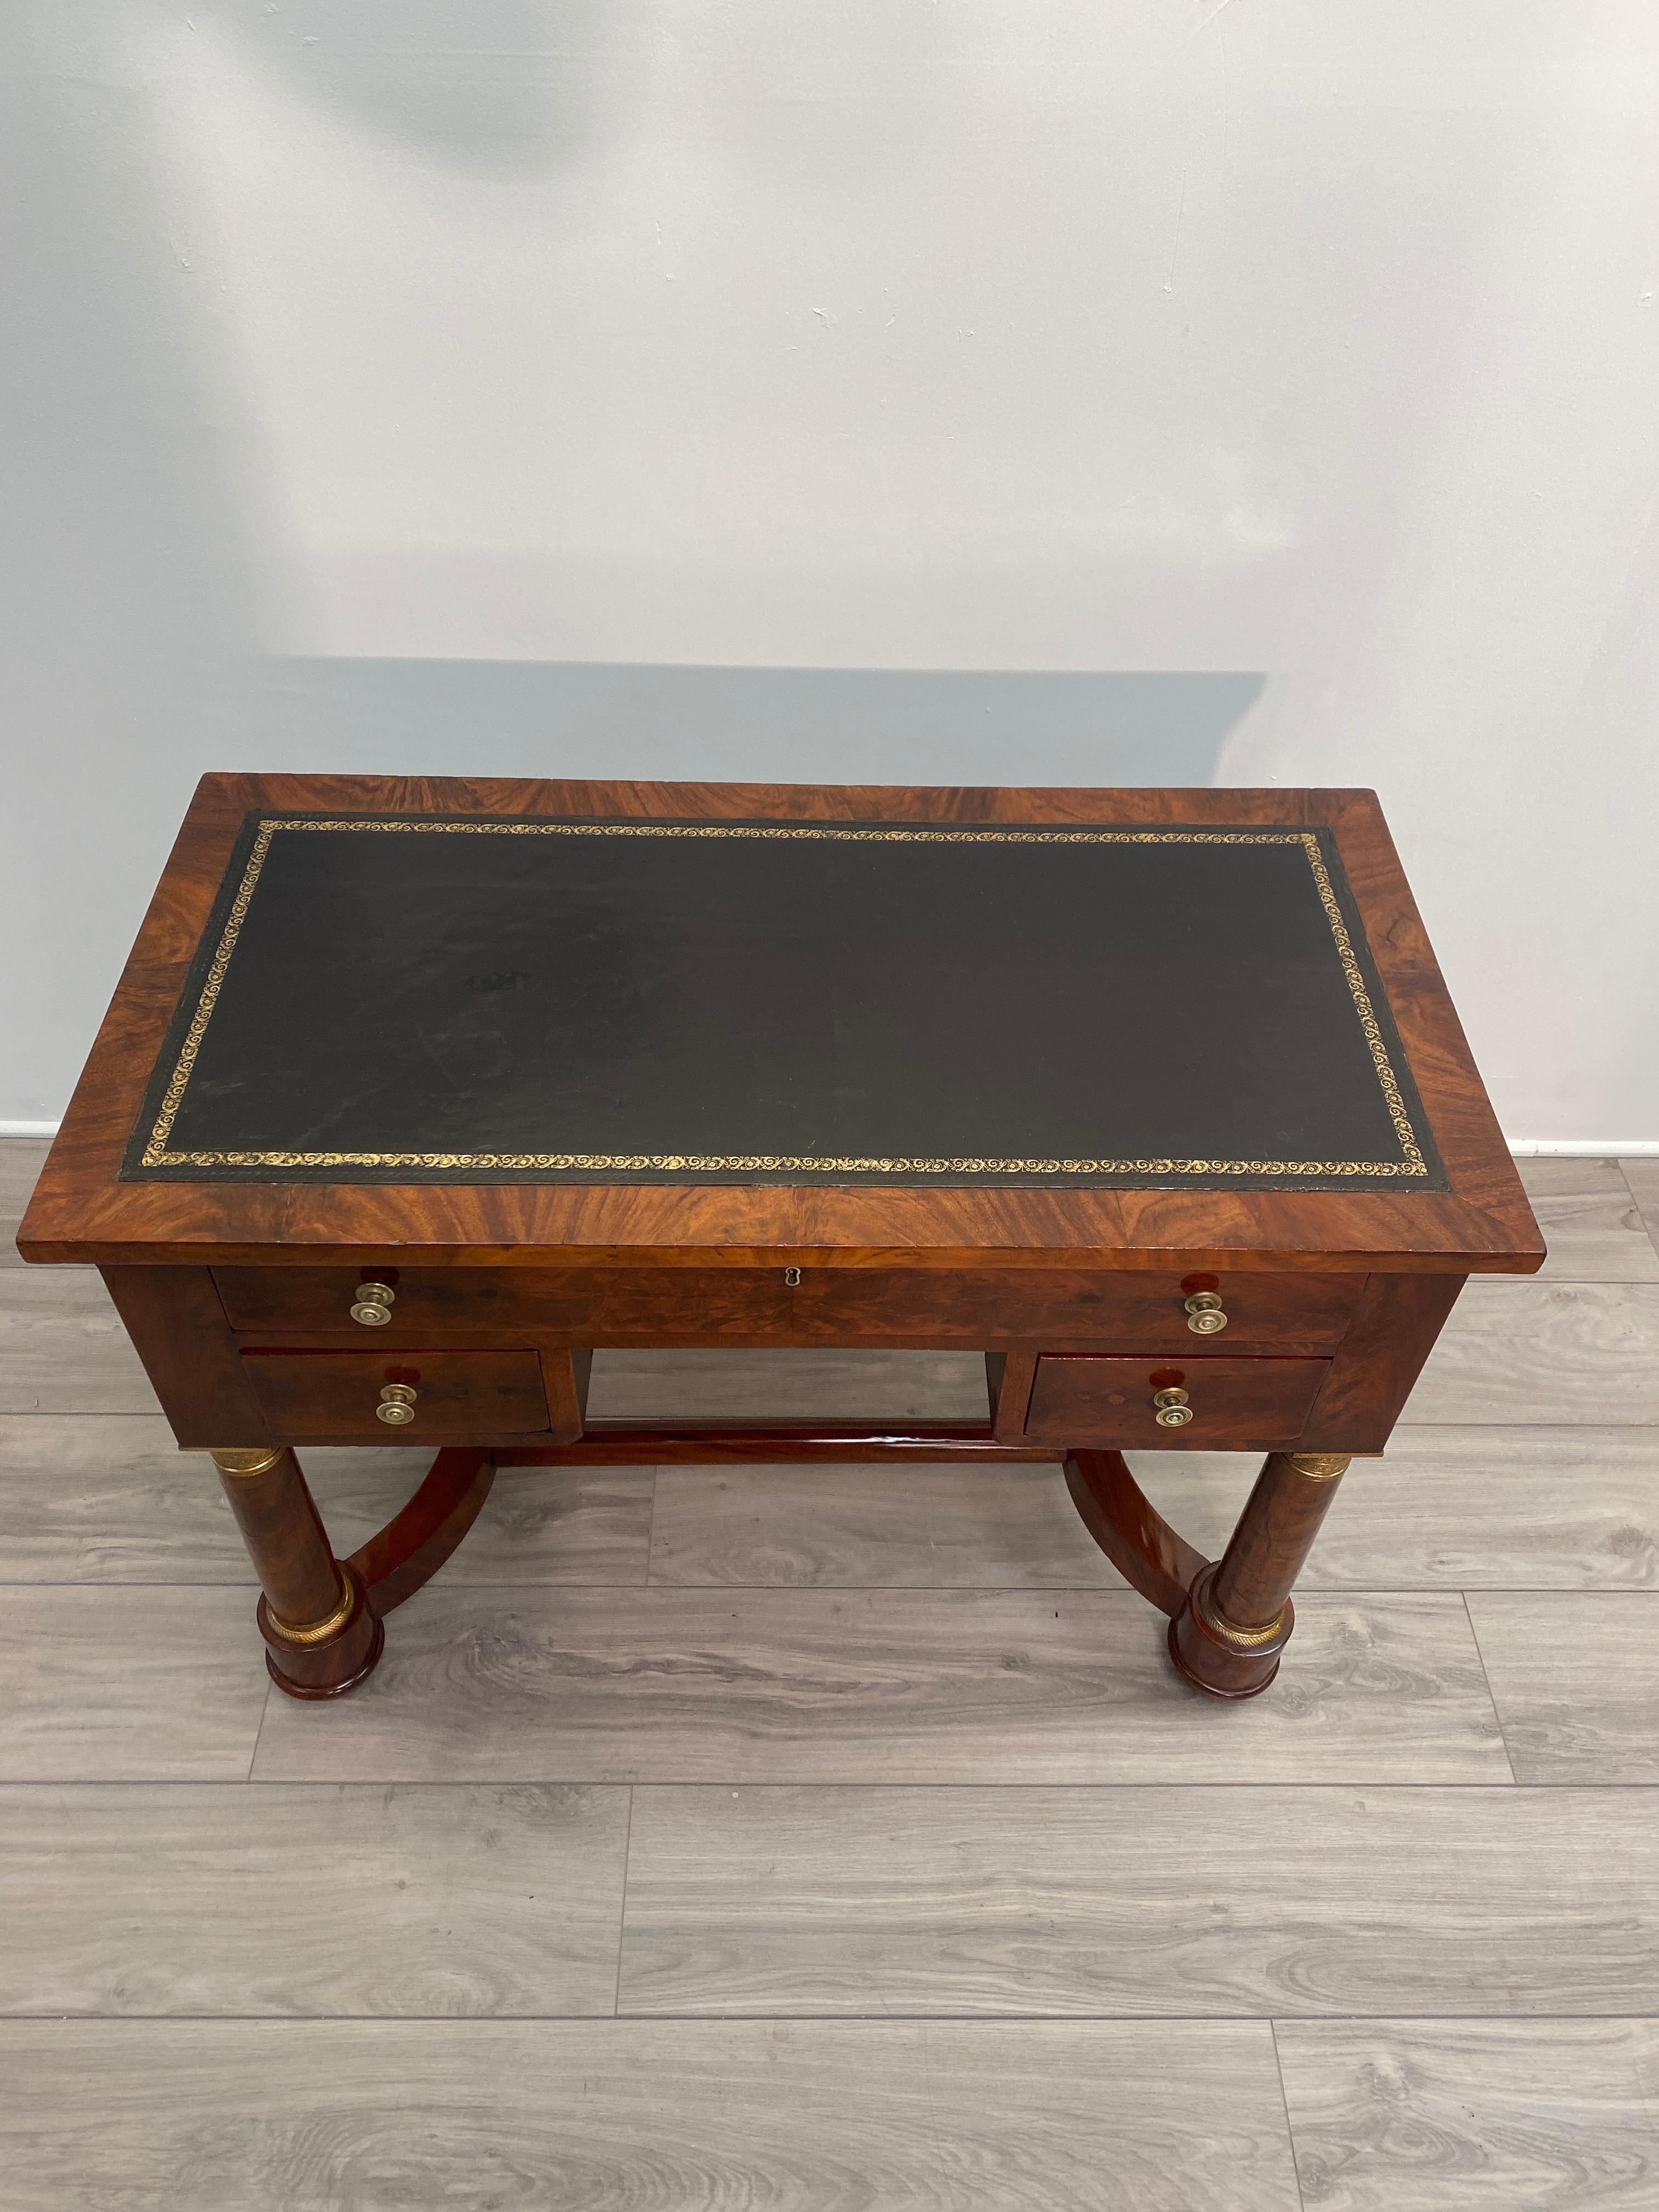 Mahogany Early 19th Century French Empire Desk For Sale